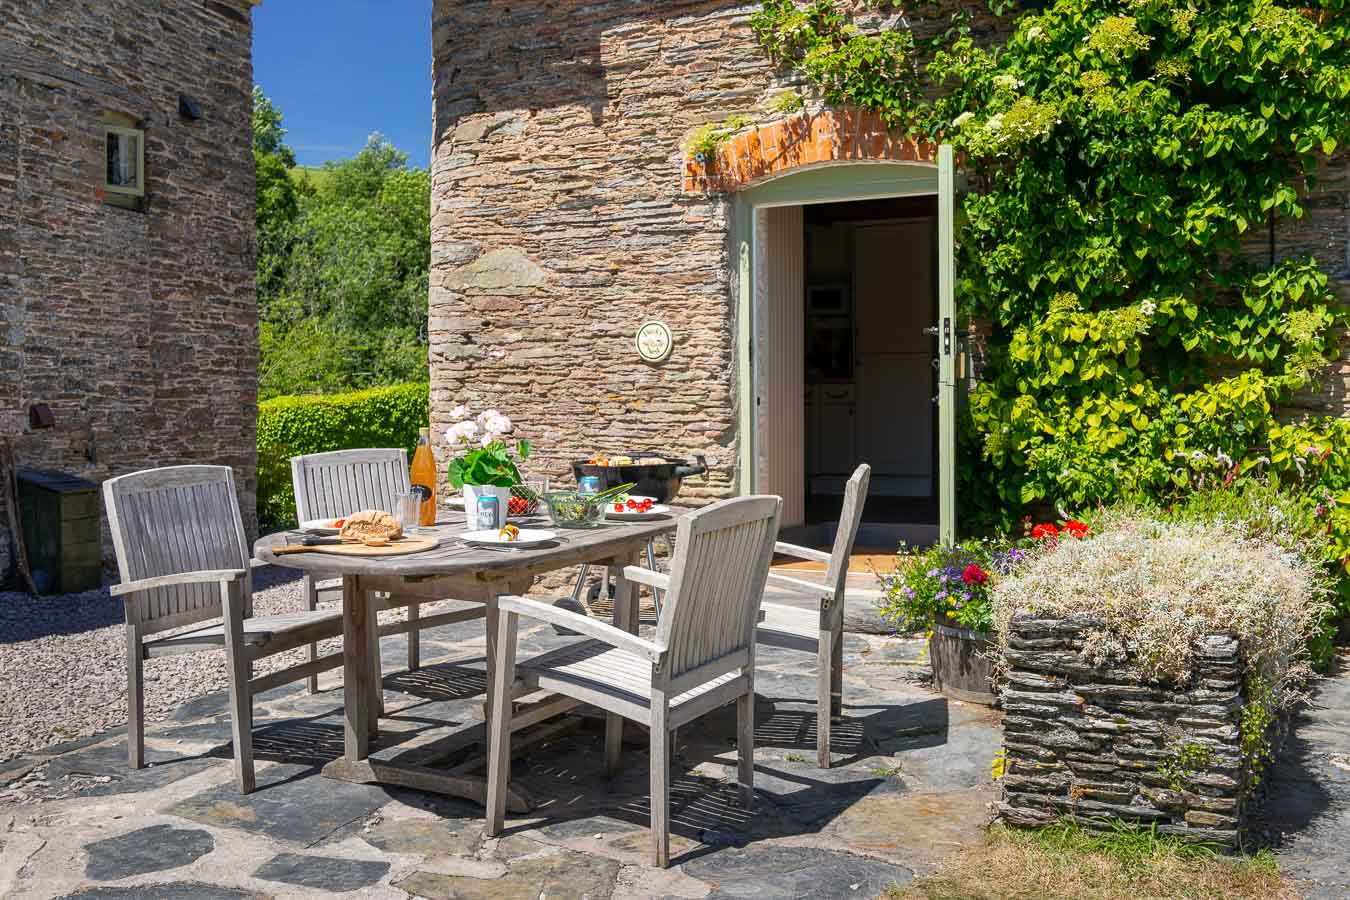 Alfresco dining on private patio outside Duck's Nest cottage Flear Farm. 